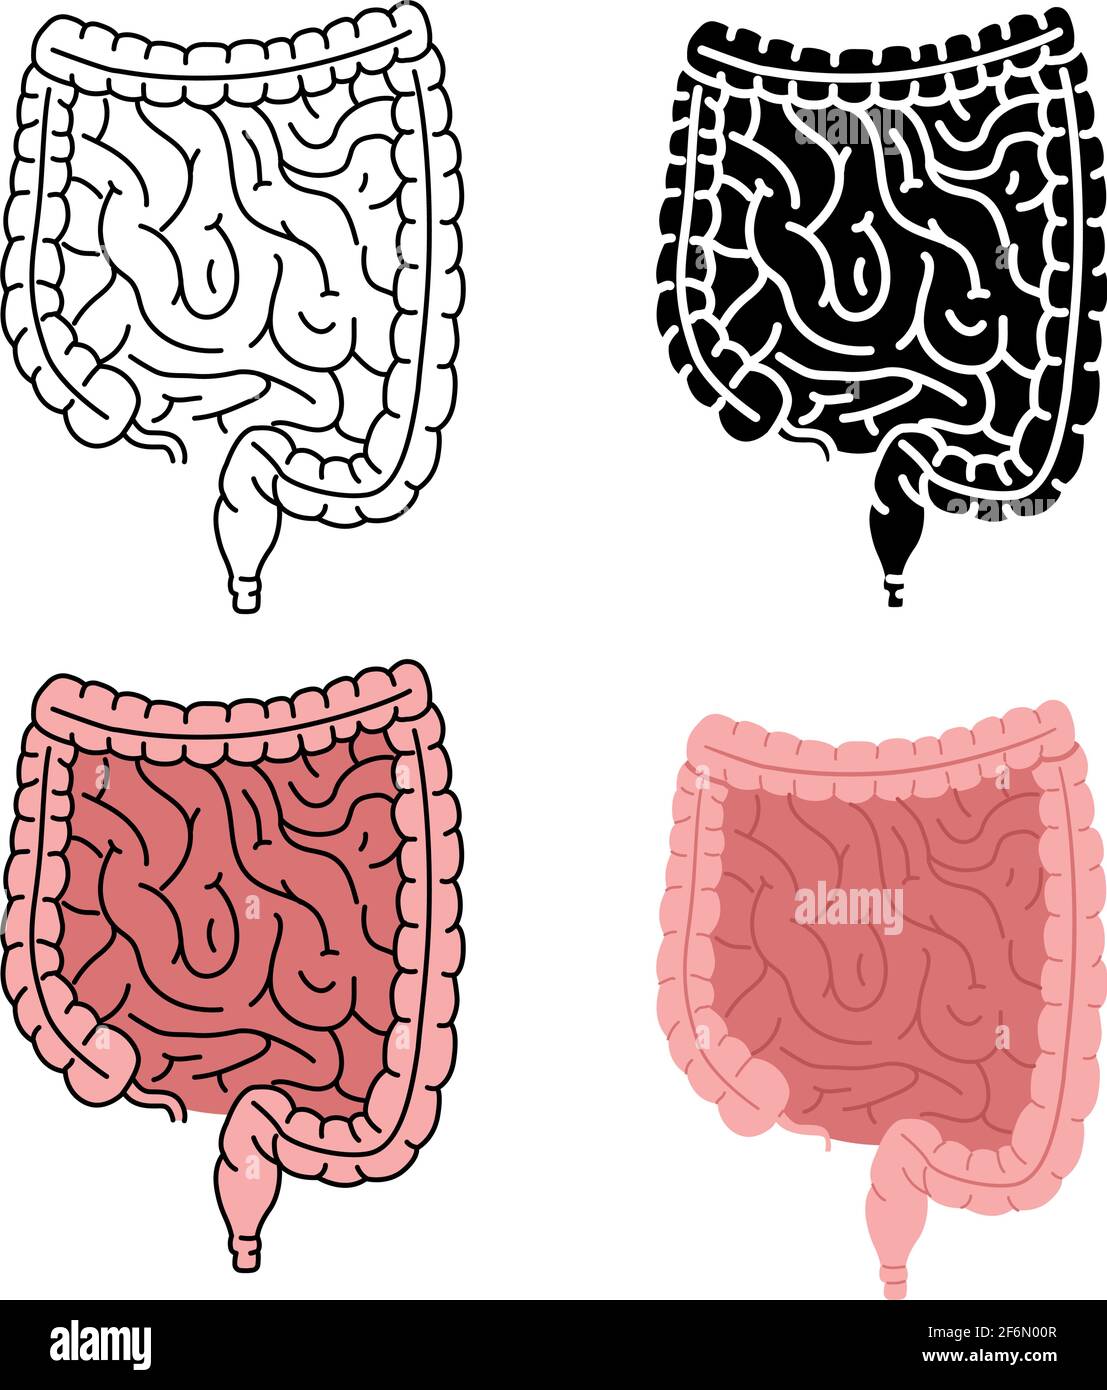 Healthy human intestines vector illustration isolated on white background Stock Vector